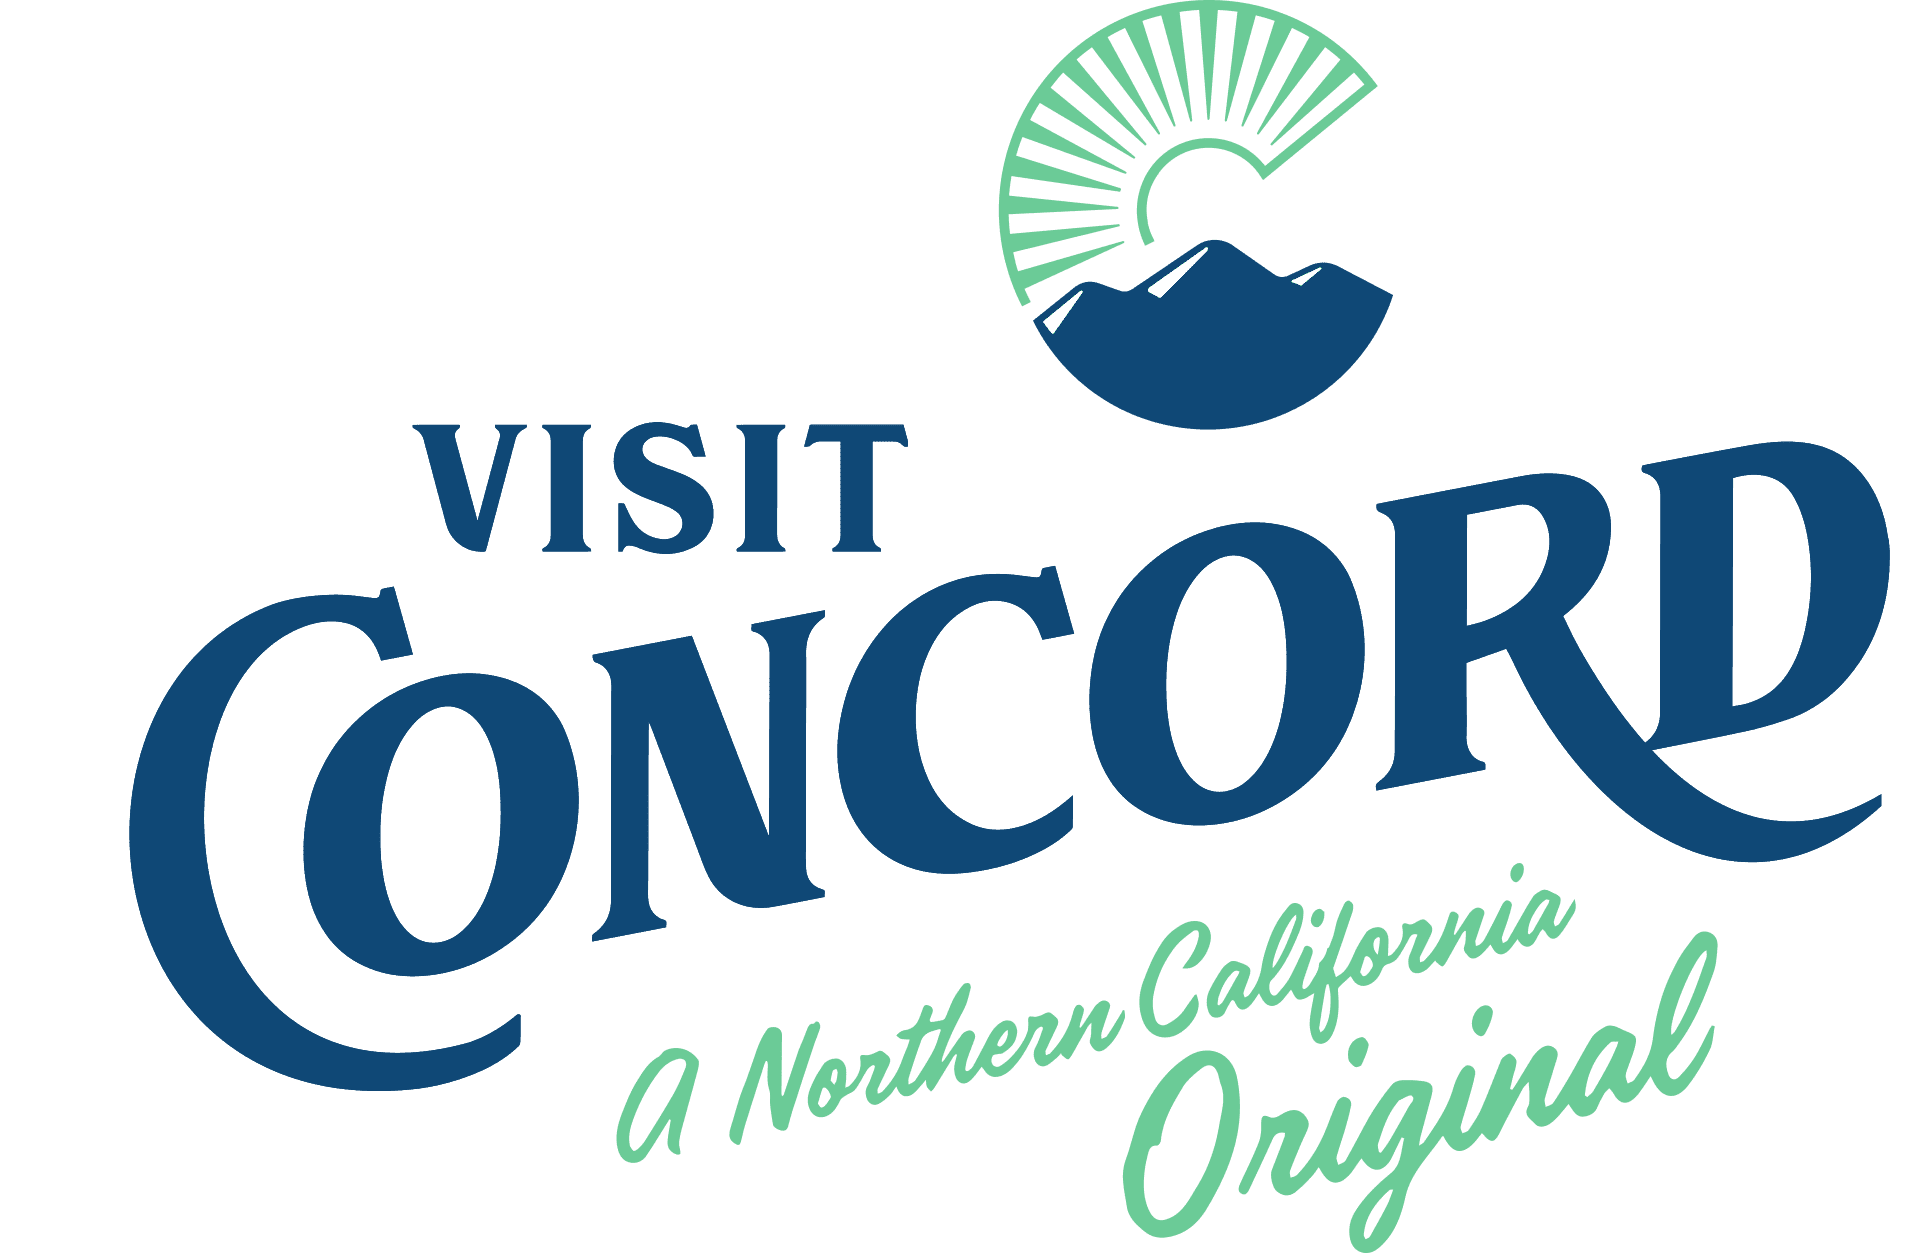 VisitConcord_FullColor (1) (1).png